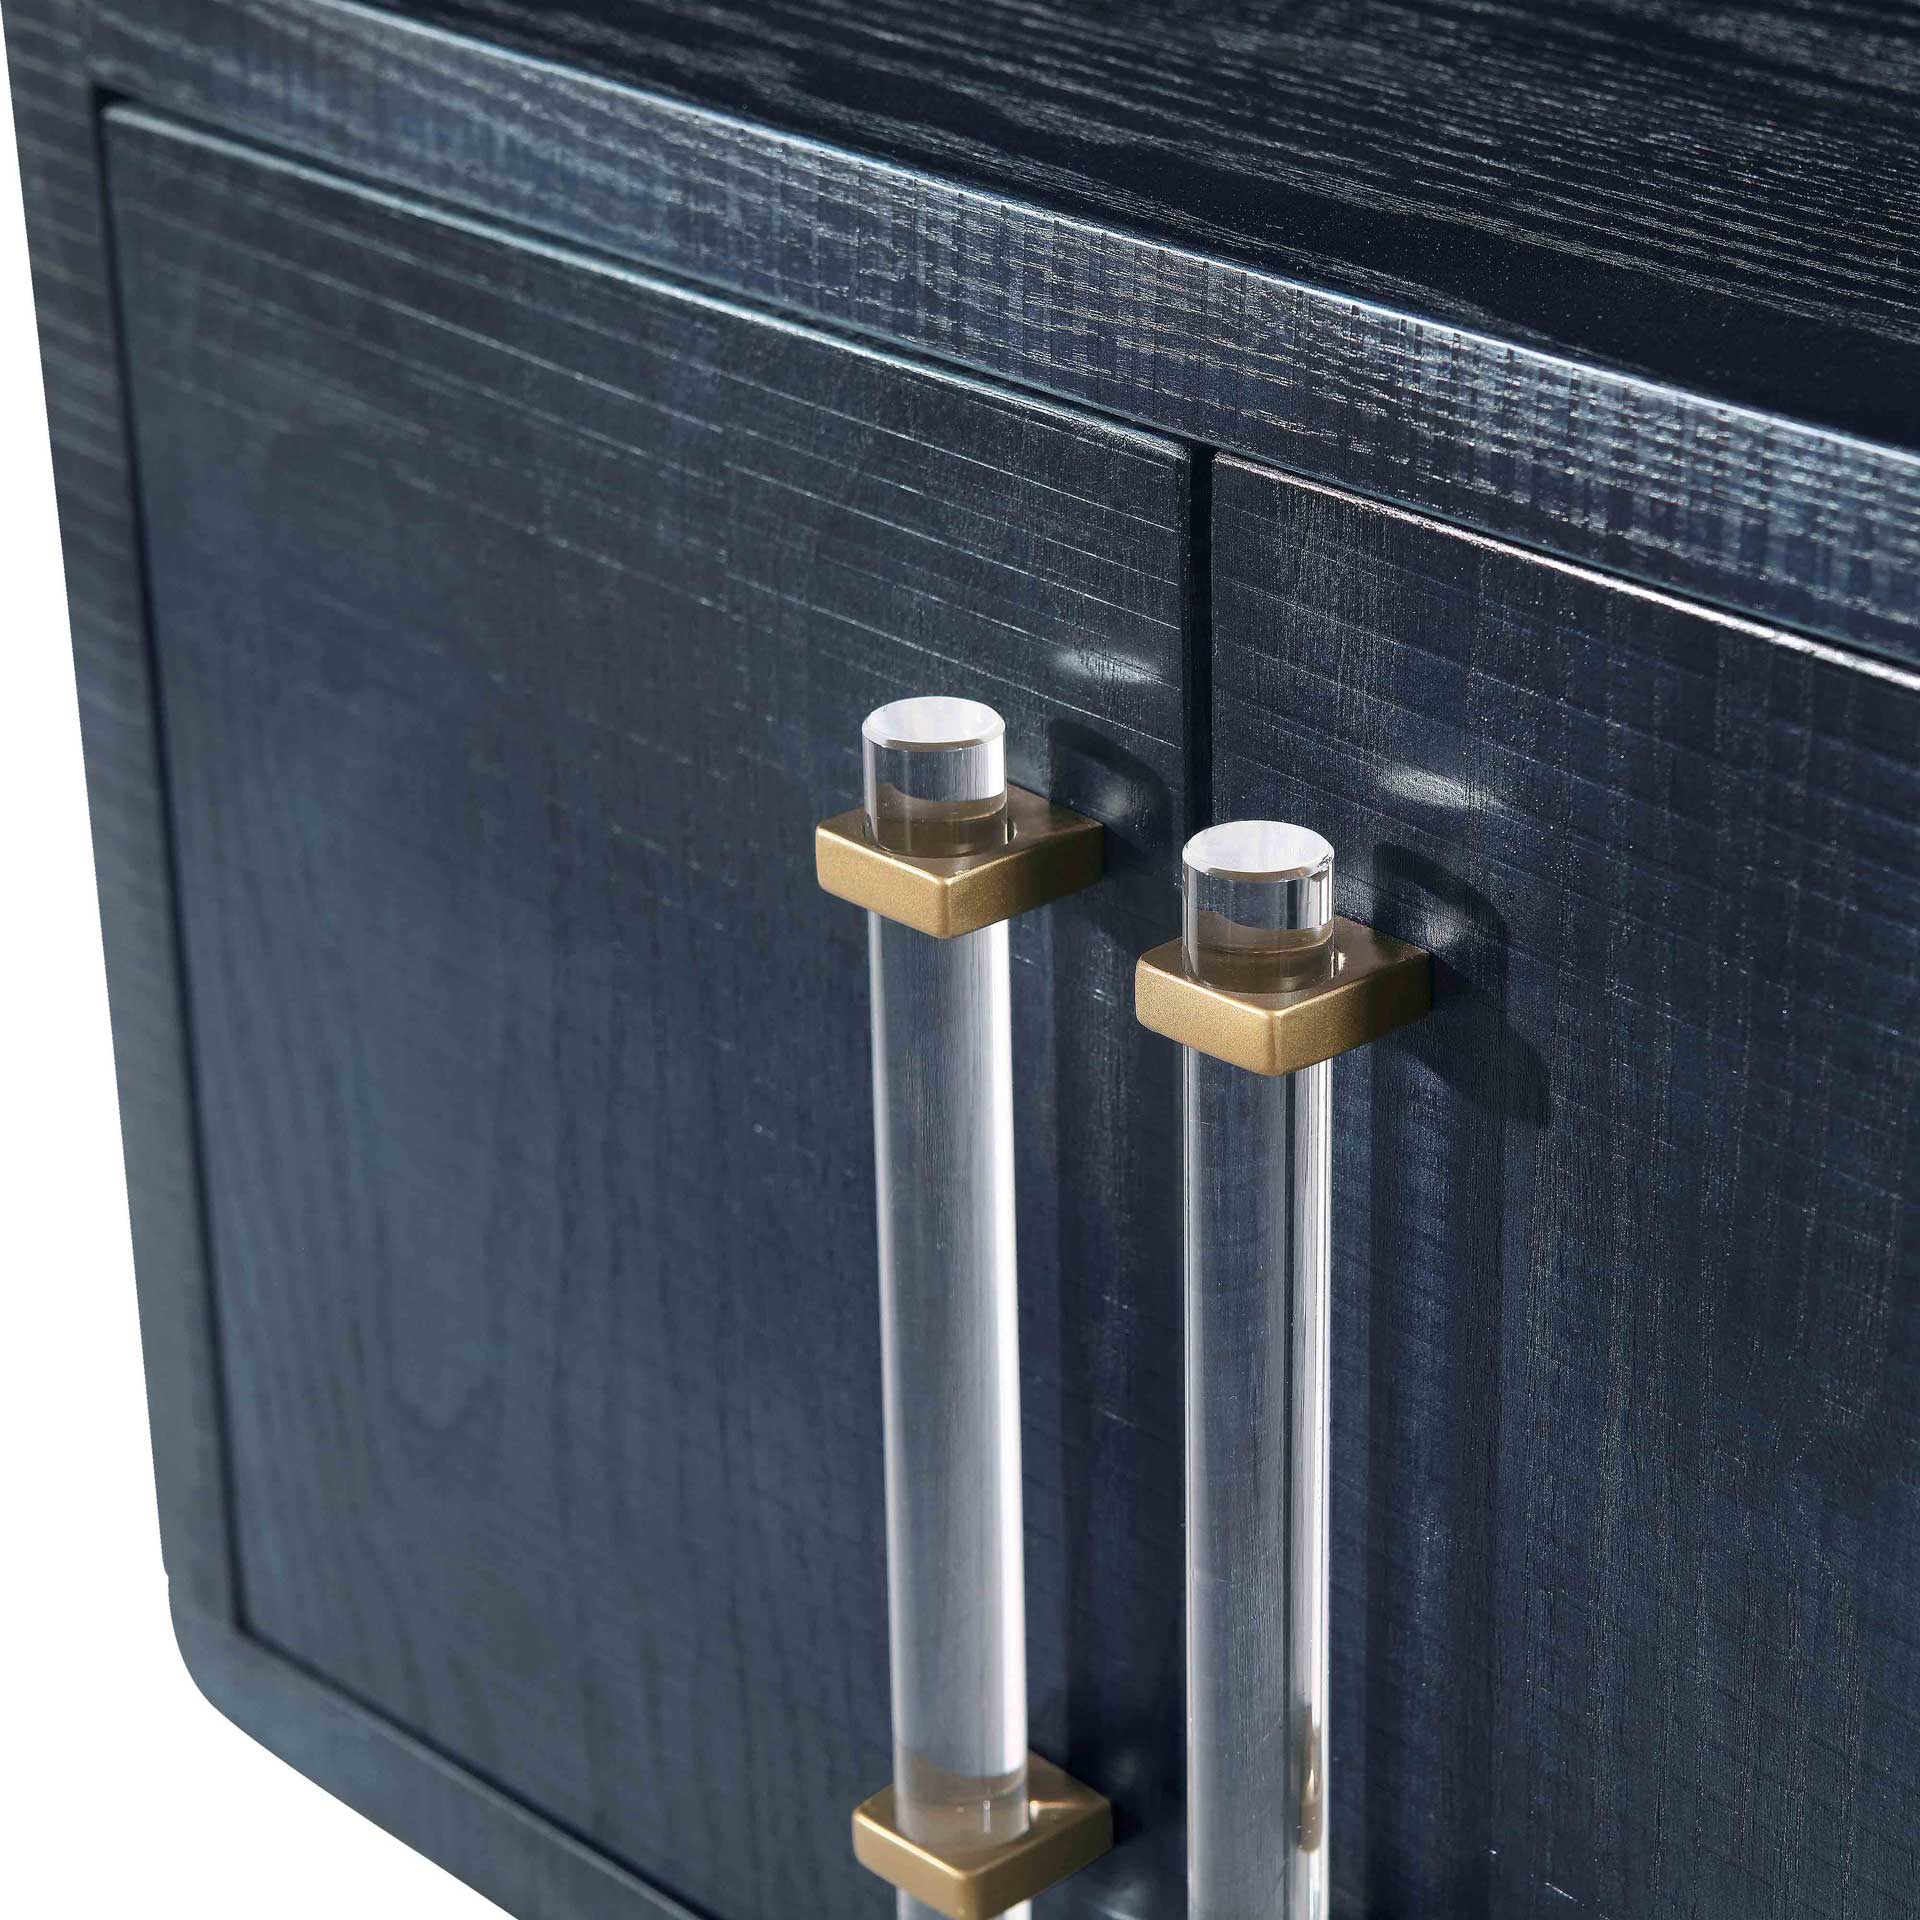 Madelyn Lacquer Side Table Indigo